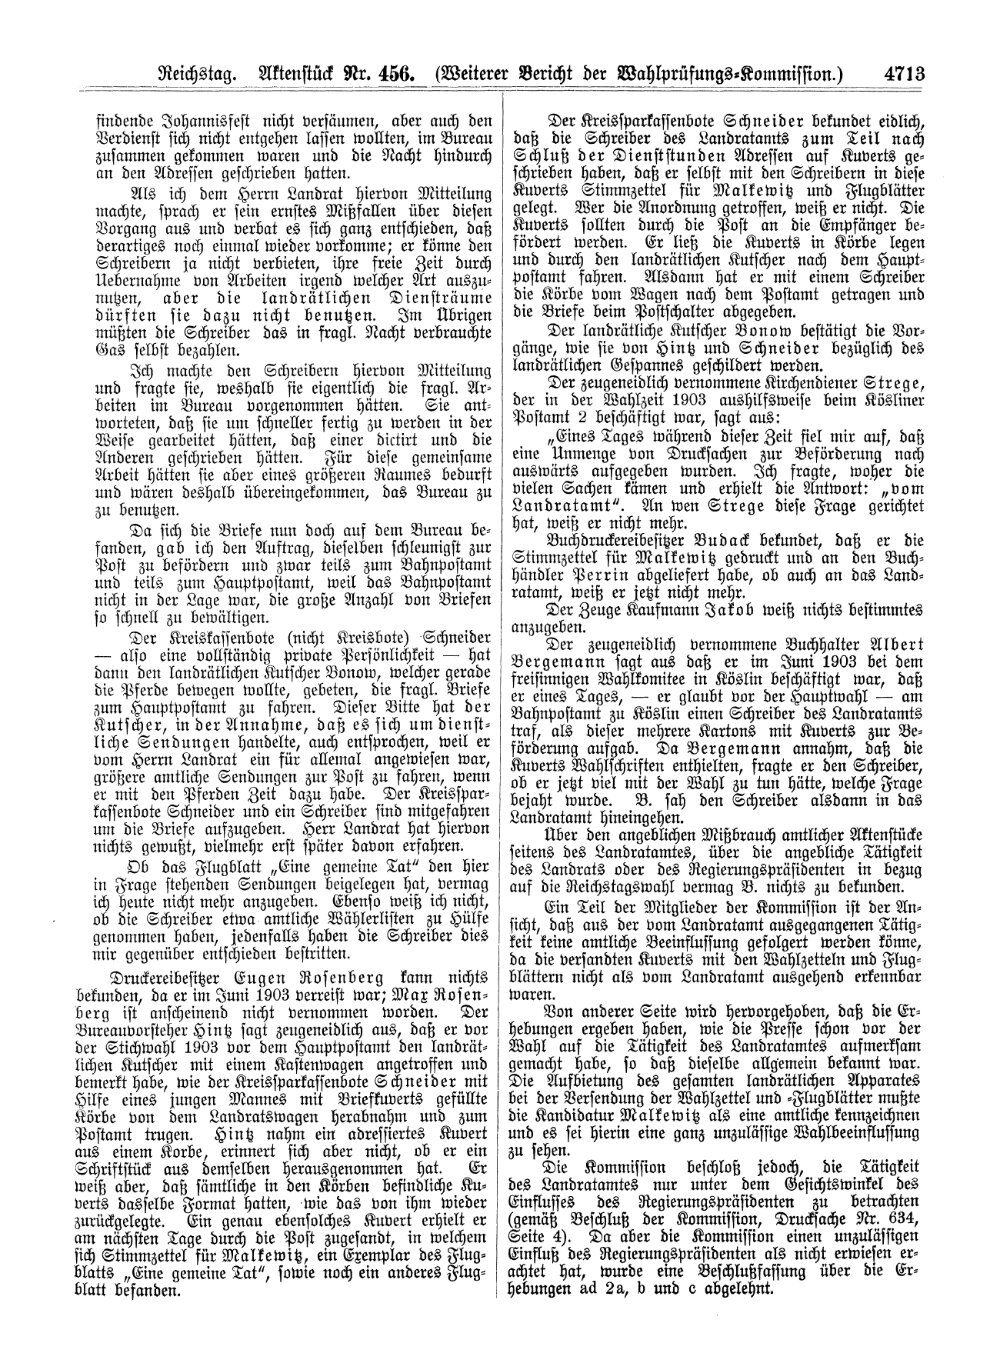 Scan of page 4713